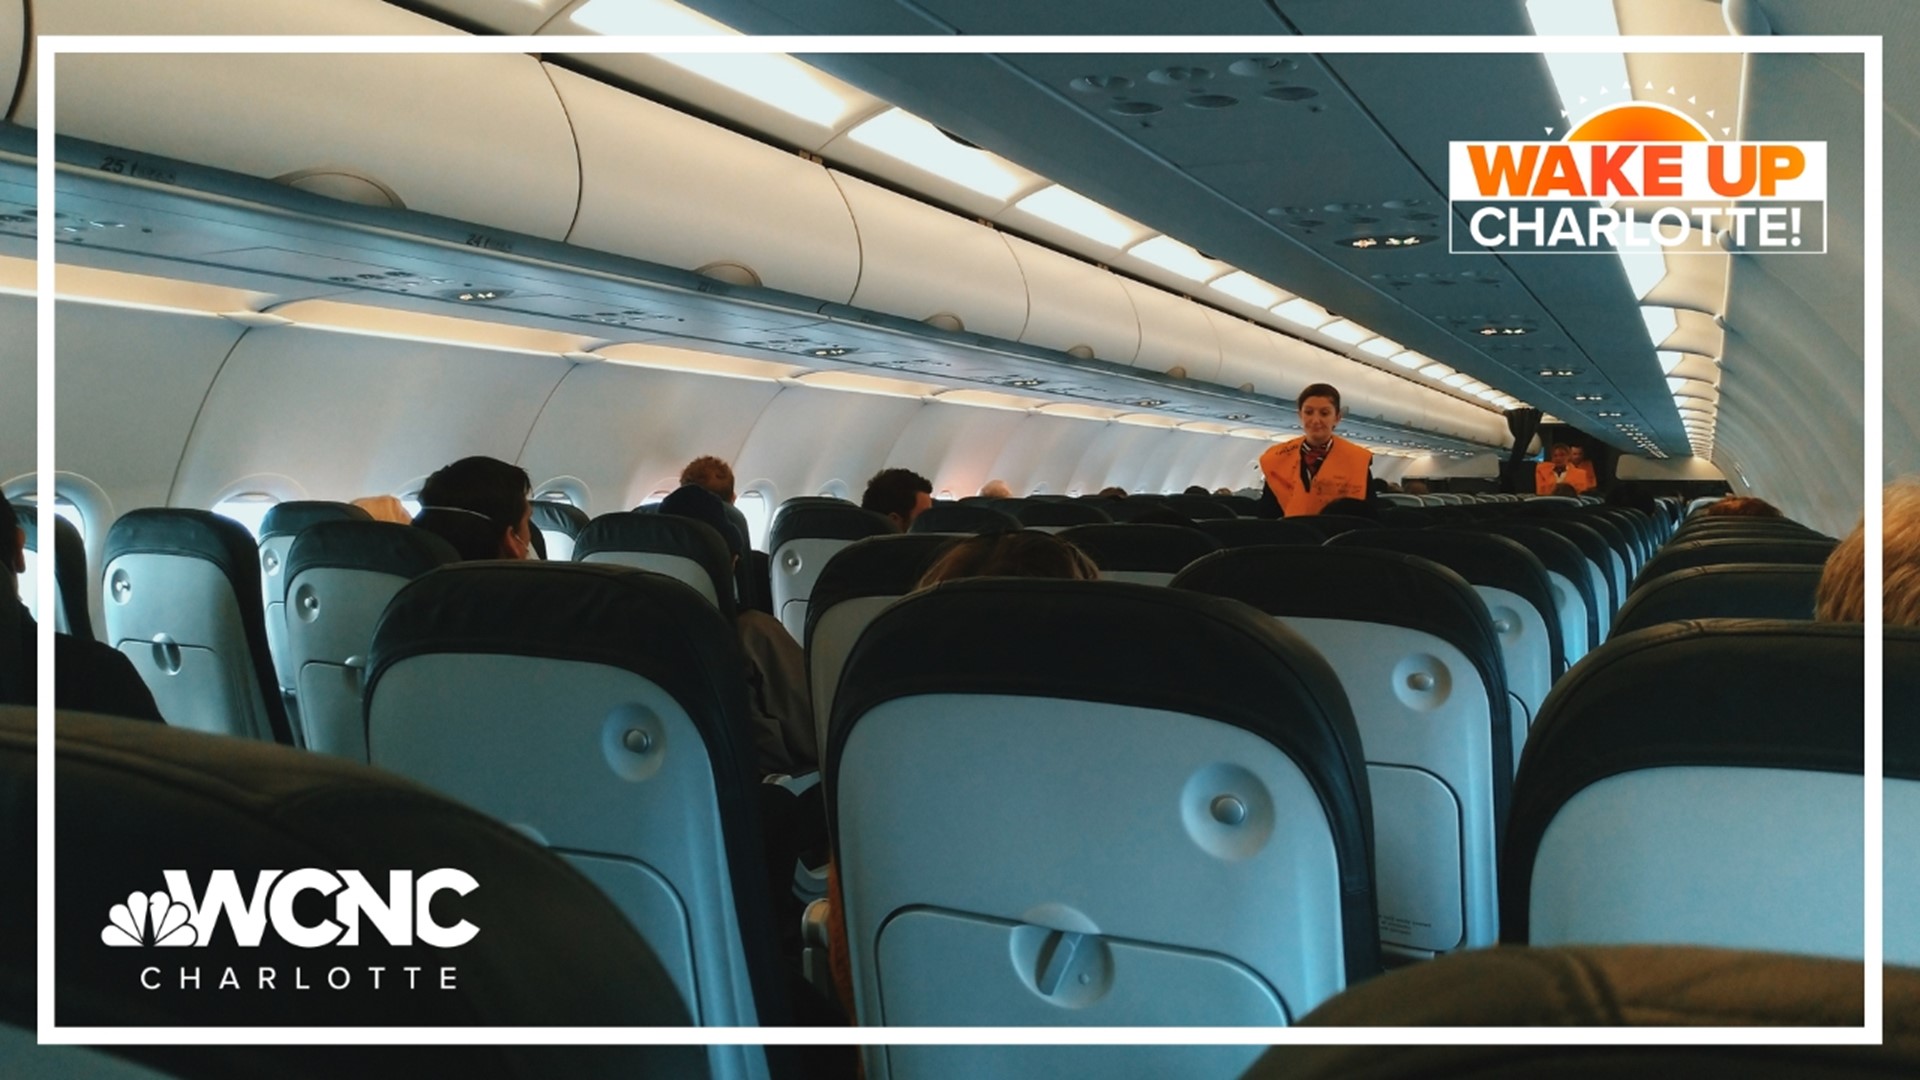 Several studies show boarding window seats first, then middle seats, then aisle seats would be the quickest way for everyone on board.